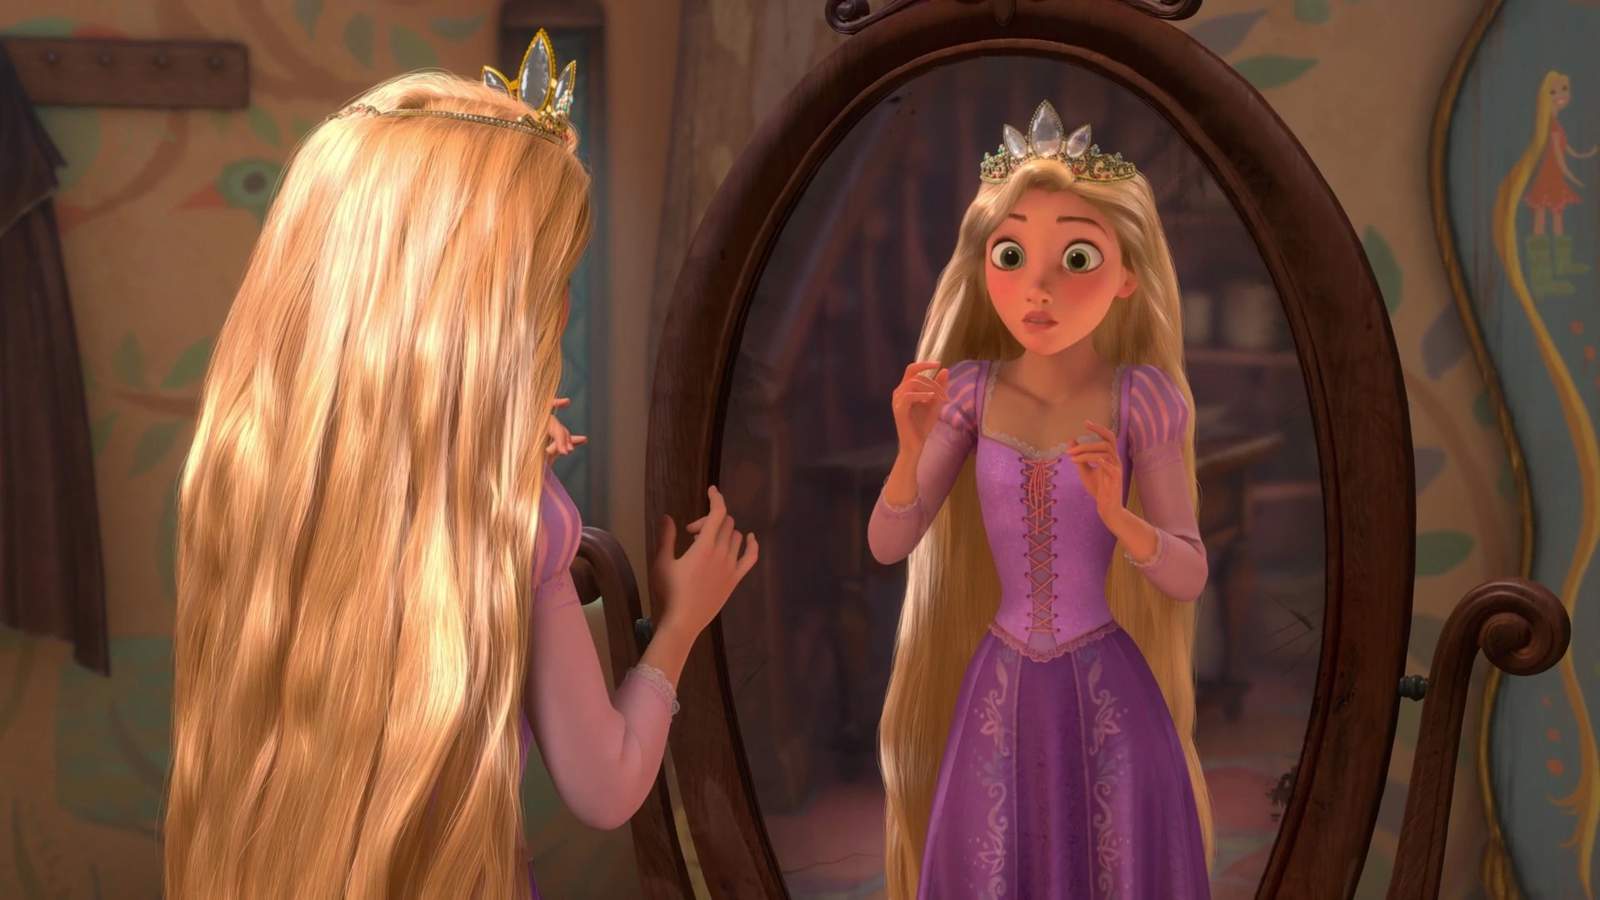 Why people are relating Disney’s ‘Tangled’ to the coronavirus pandemic